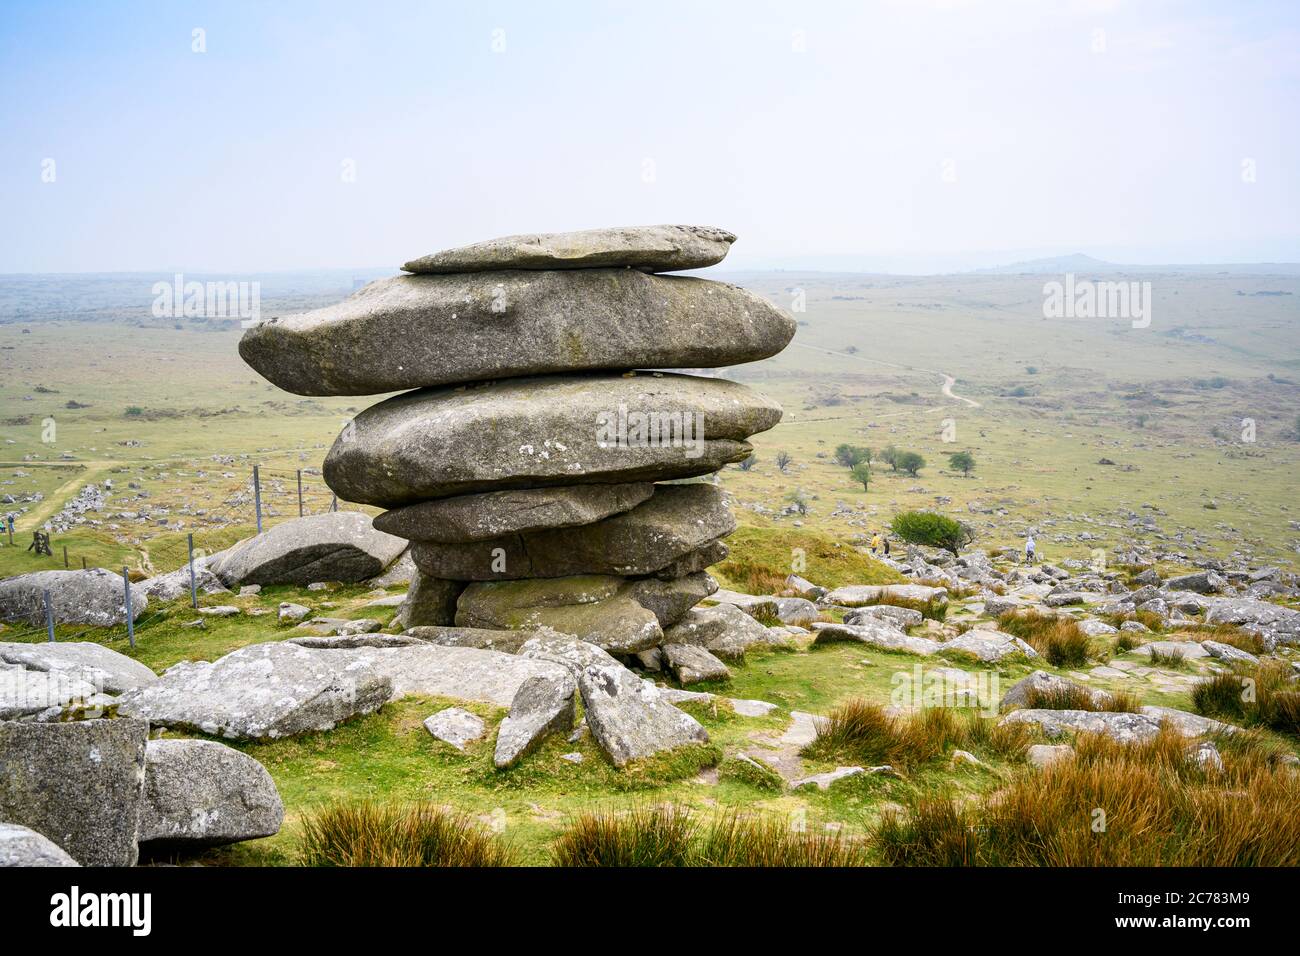 The Cheesewring is a natural granite rock formation formed by erosion.  Stowe's Hill, Bodmin Moor, Cornwall, England, UK. Stock Photo